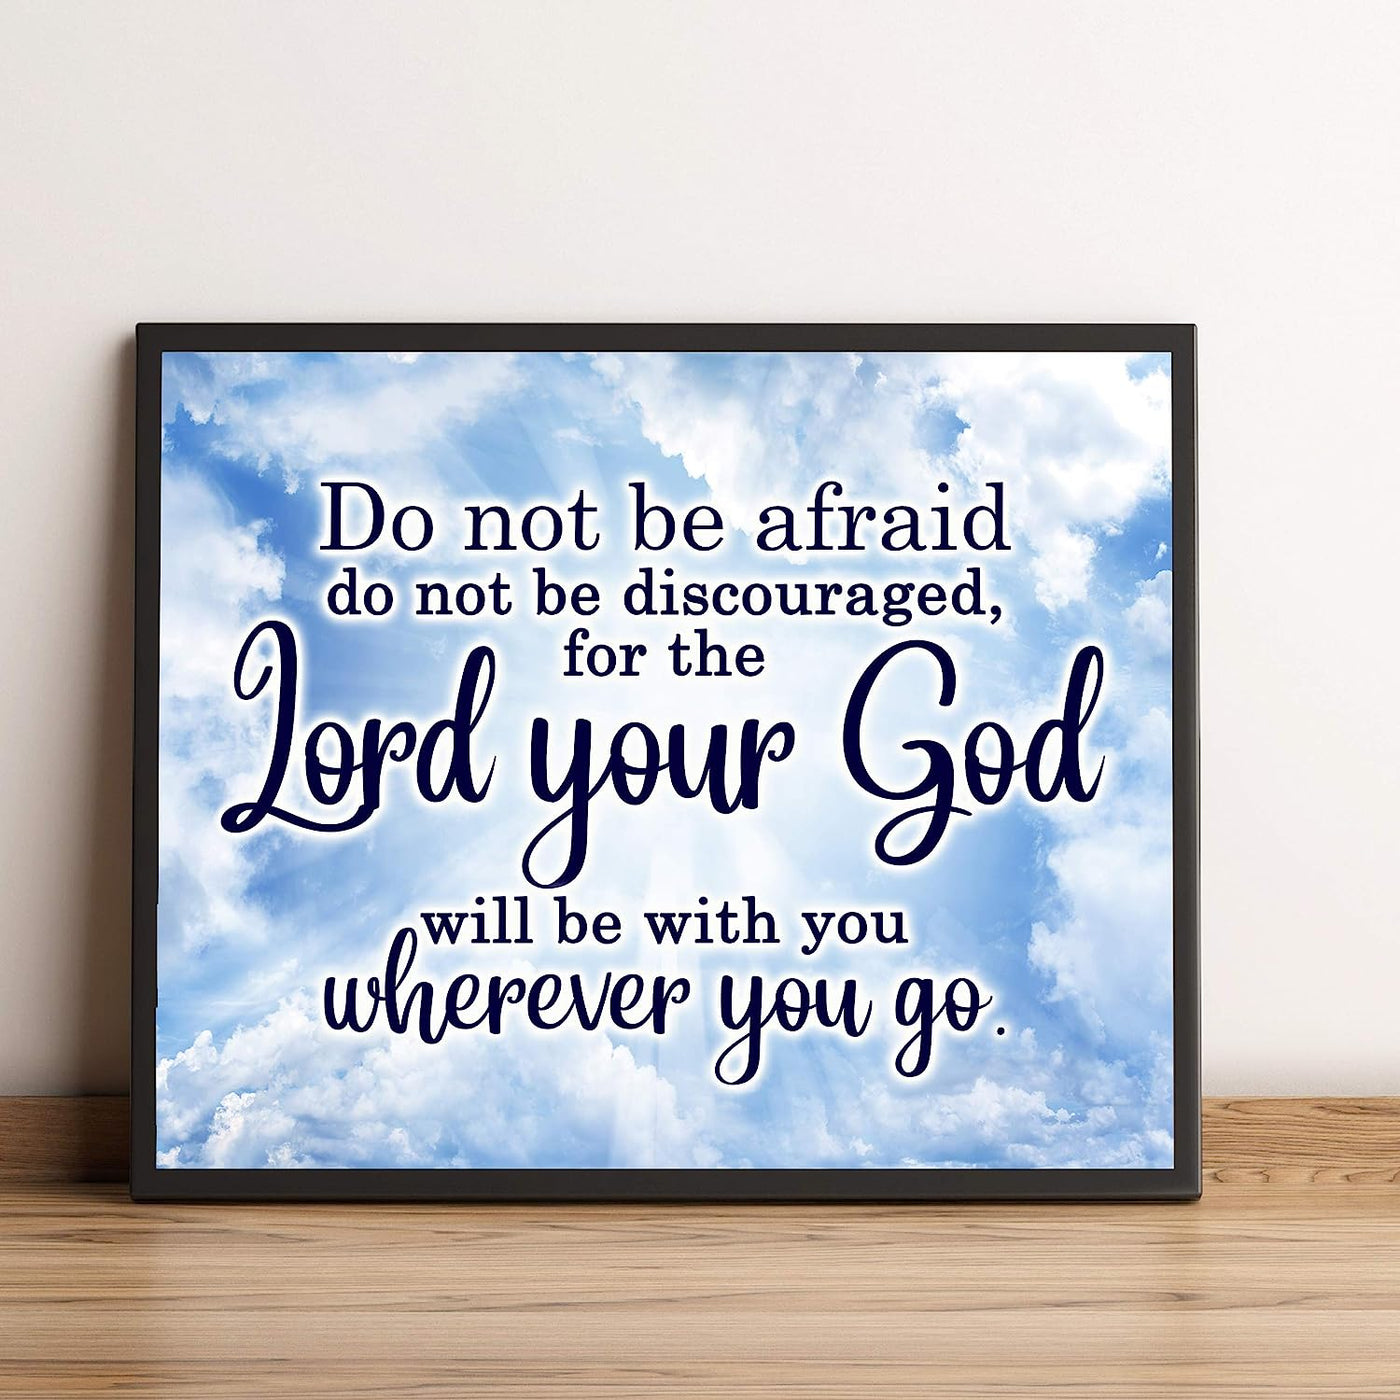 The Lord Your God Will Be With You Inspirational Quotes Wall Art Decor-10 x 8" Christian Poster Print-Ready to Frame. Motivational Home-Office-Farmhouse-Church Decor. Great Religious Gift of Faith!